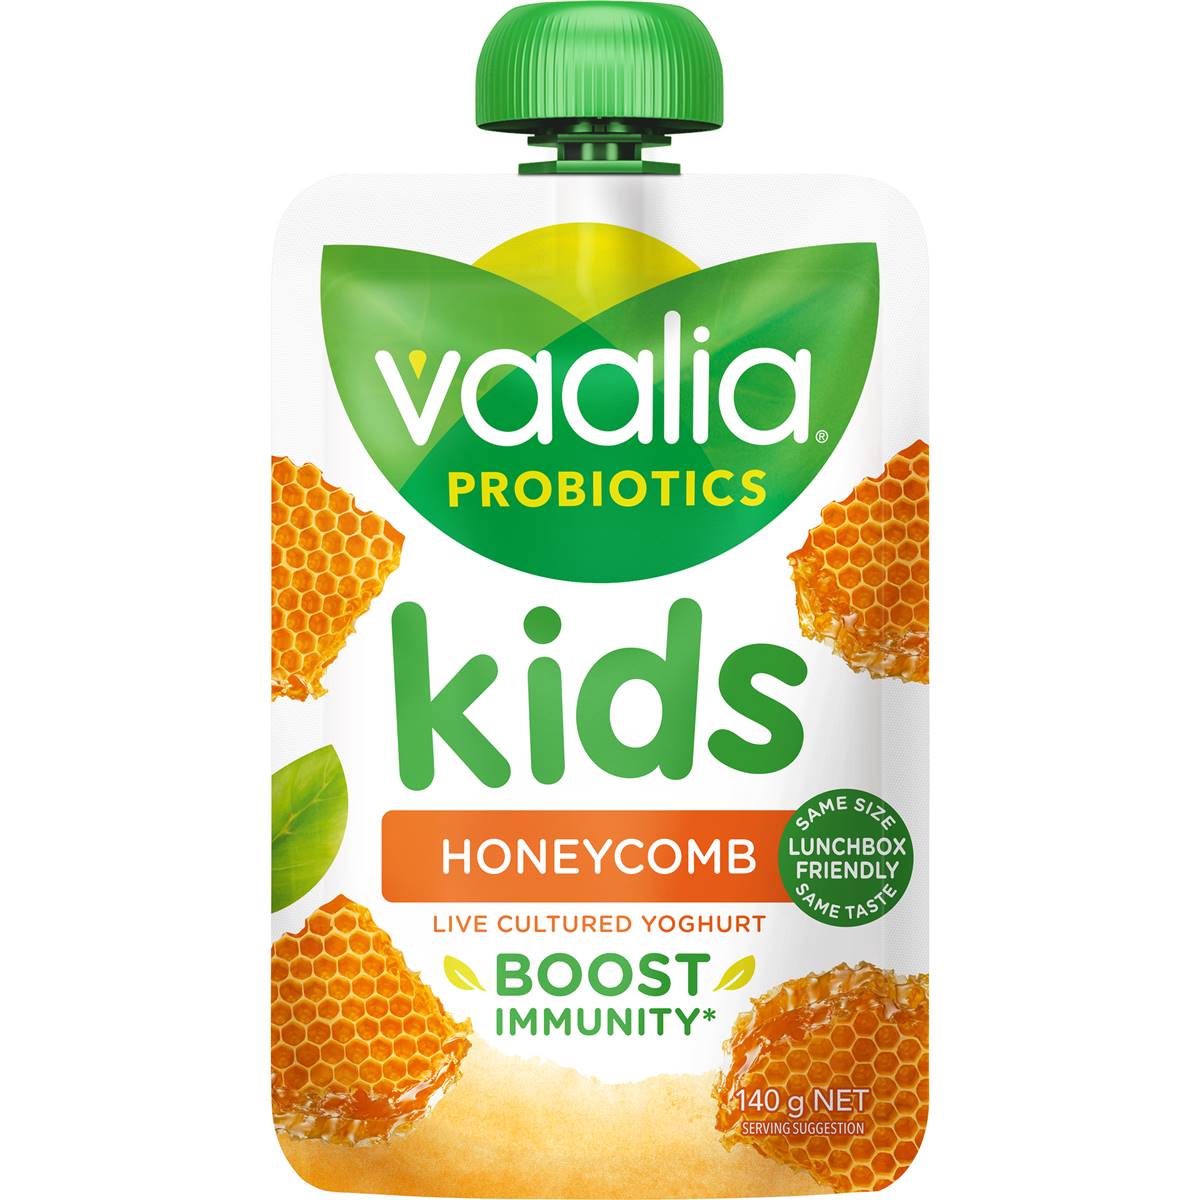 Calories in Vaalia Kids Probiotic Yoghurt Pouch Limited Edition Honeycomb